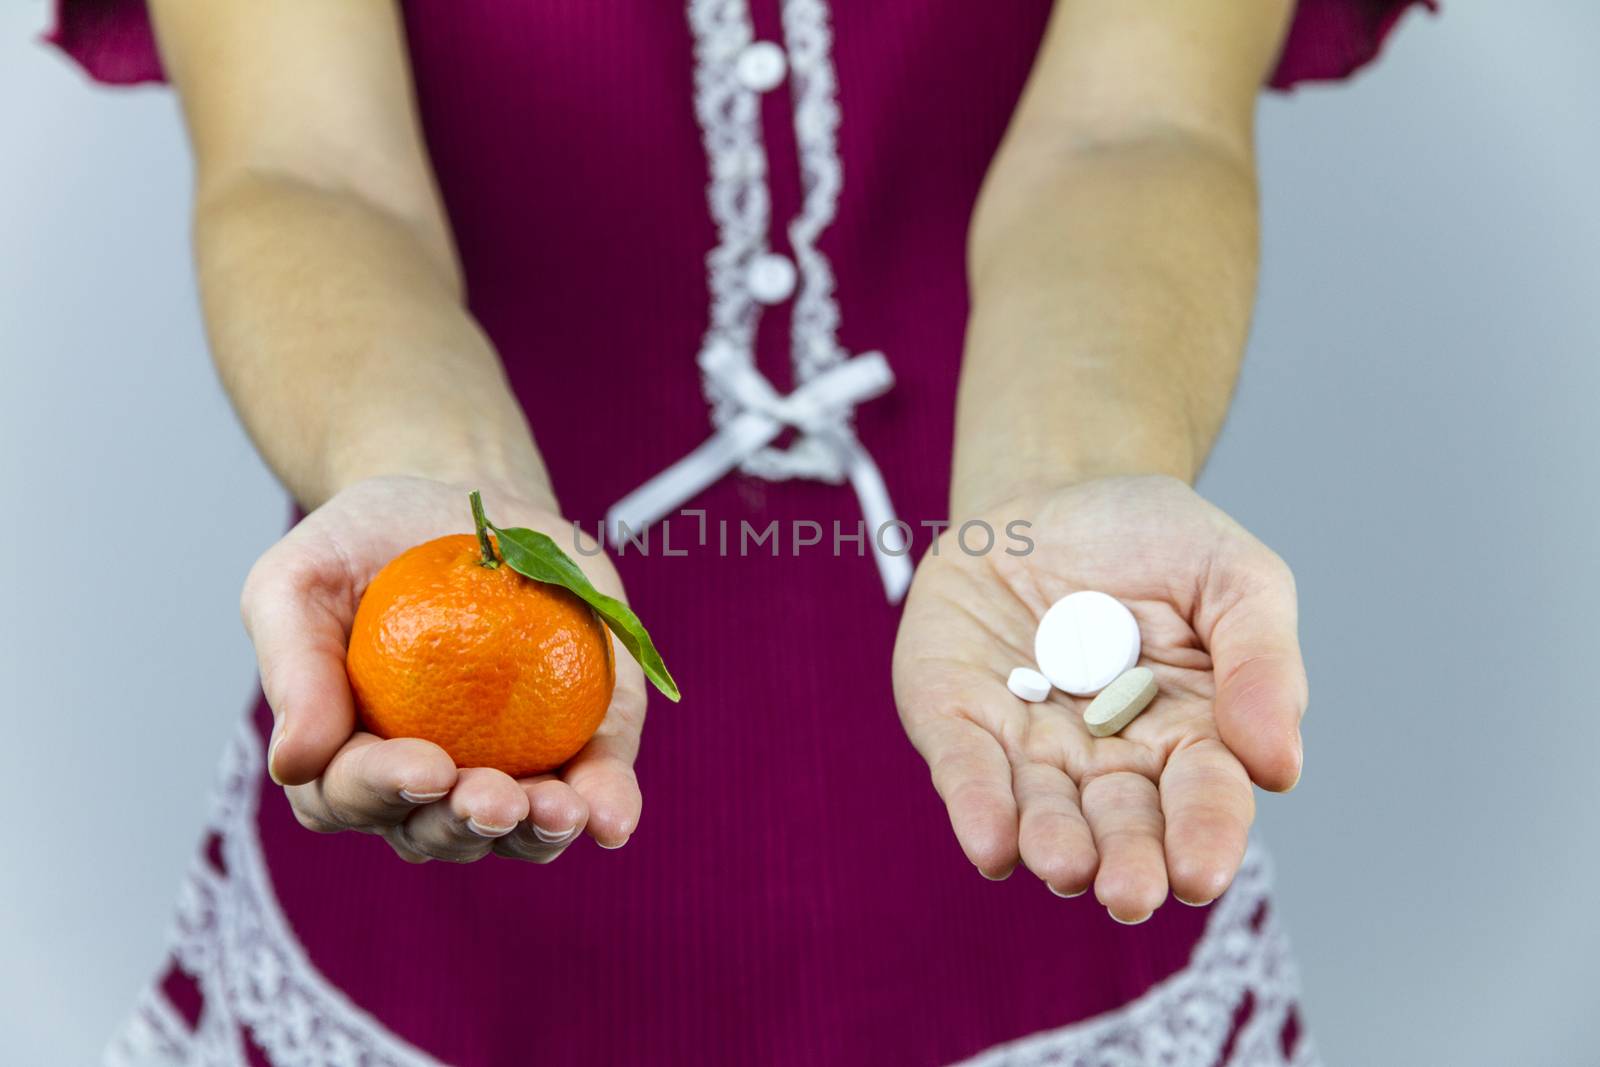 Vitamins from fruits or medicines? A young woman in burgundy pajamas shows a mandarin in her right hand and an aspirin in her left